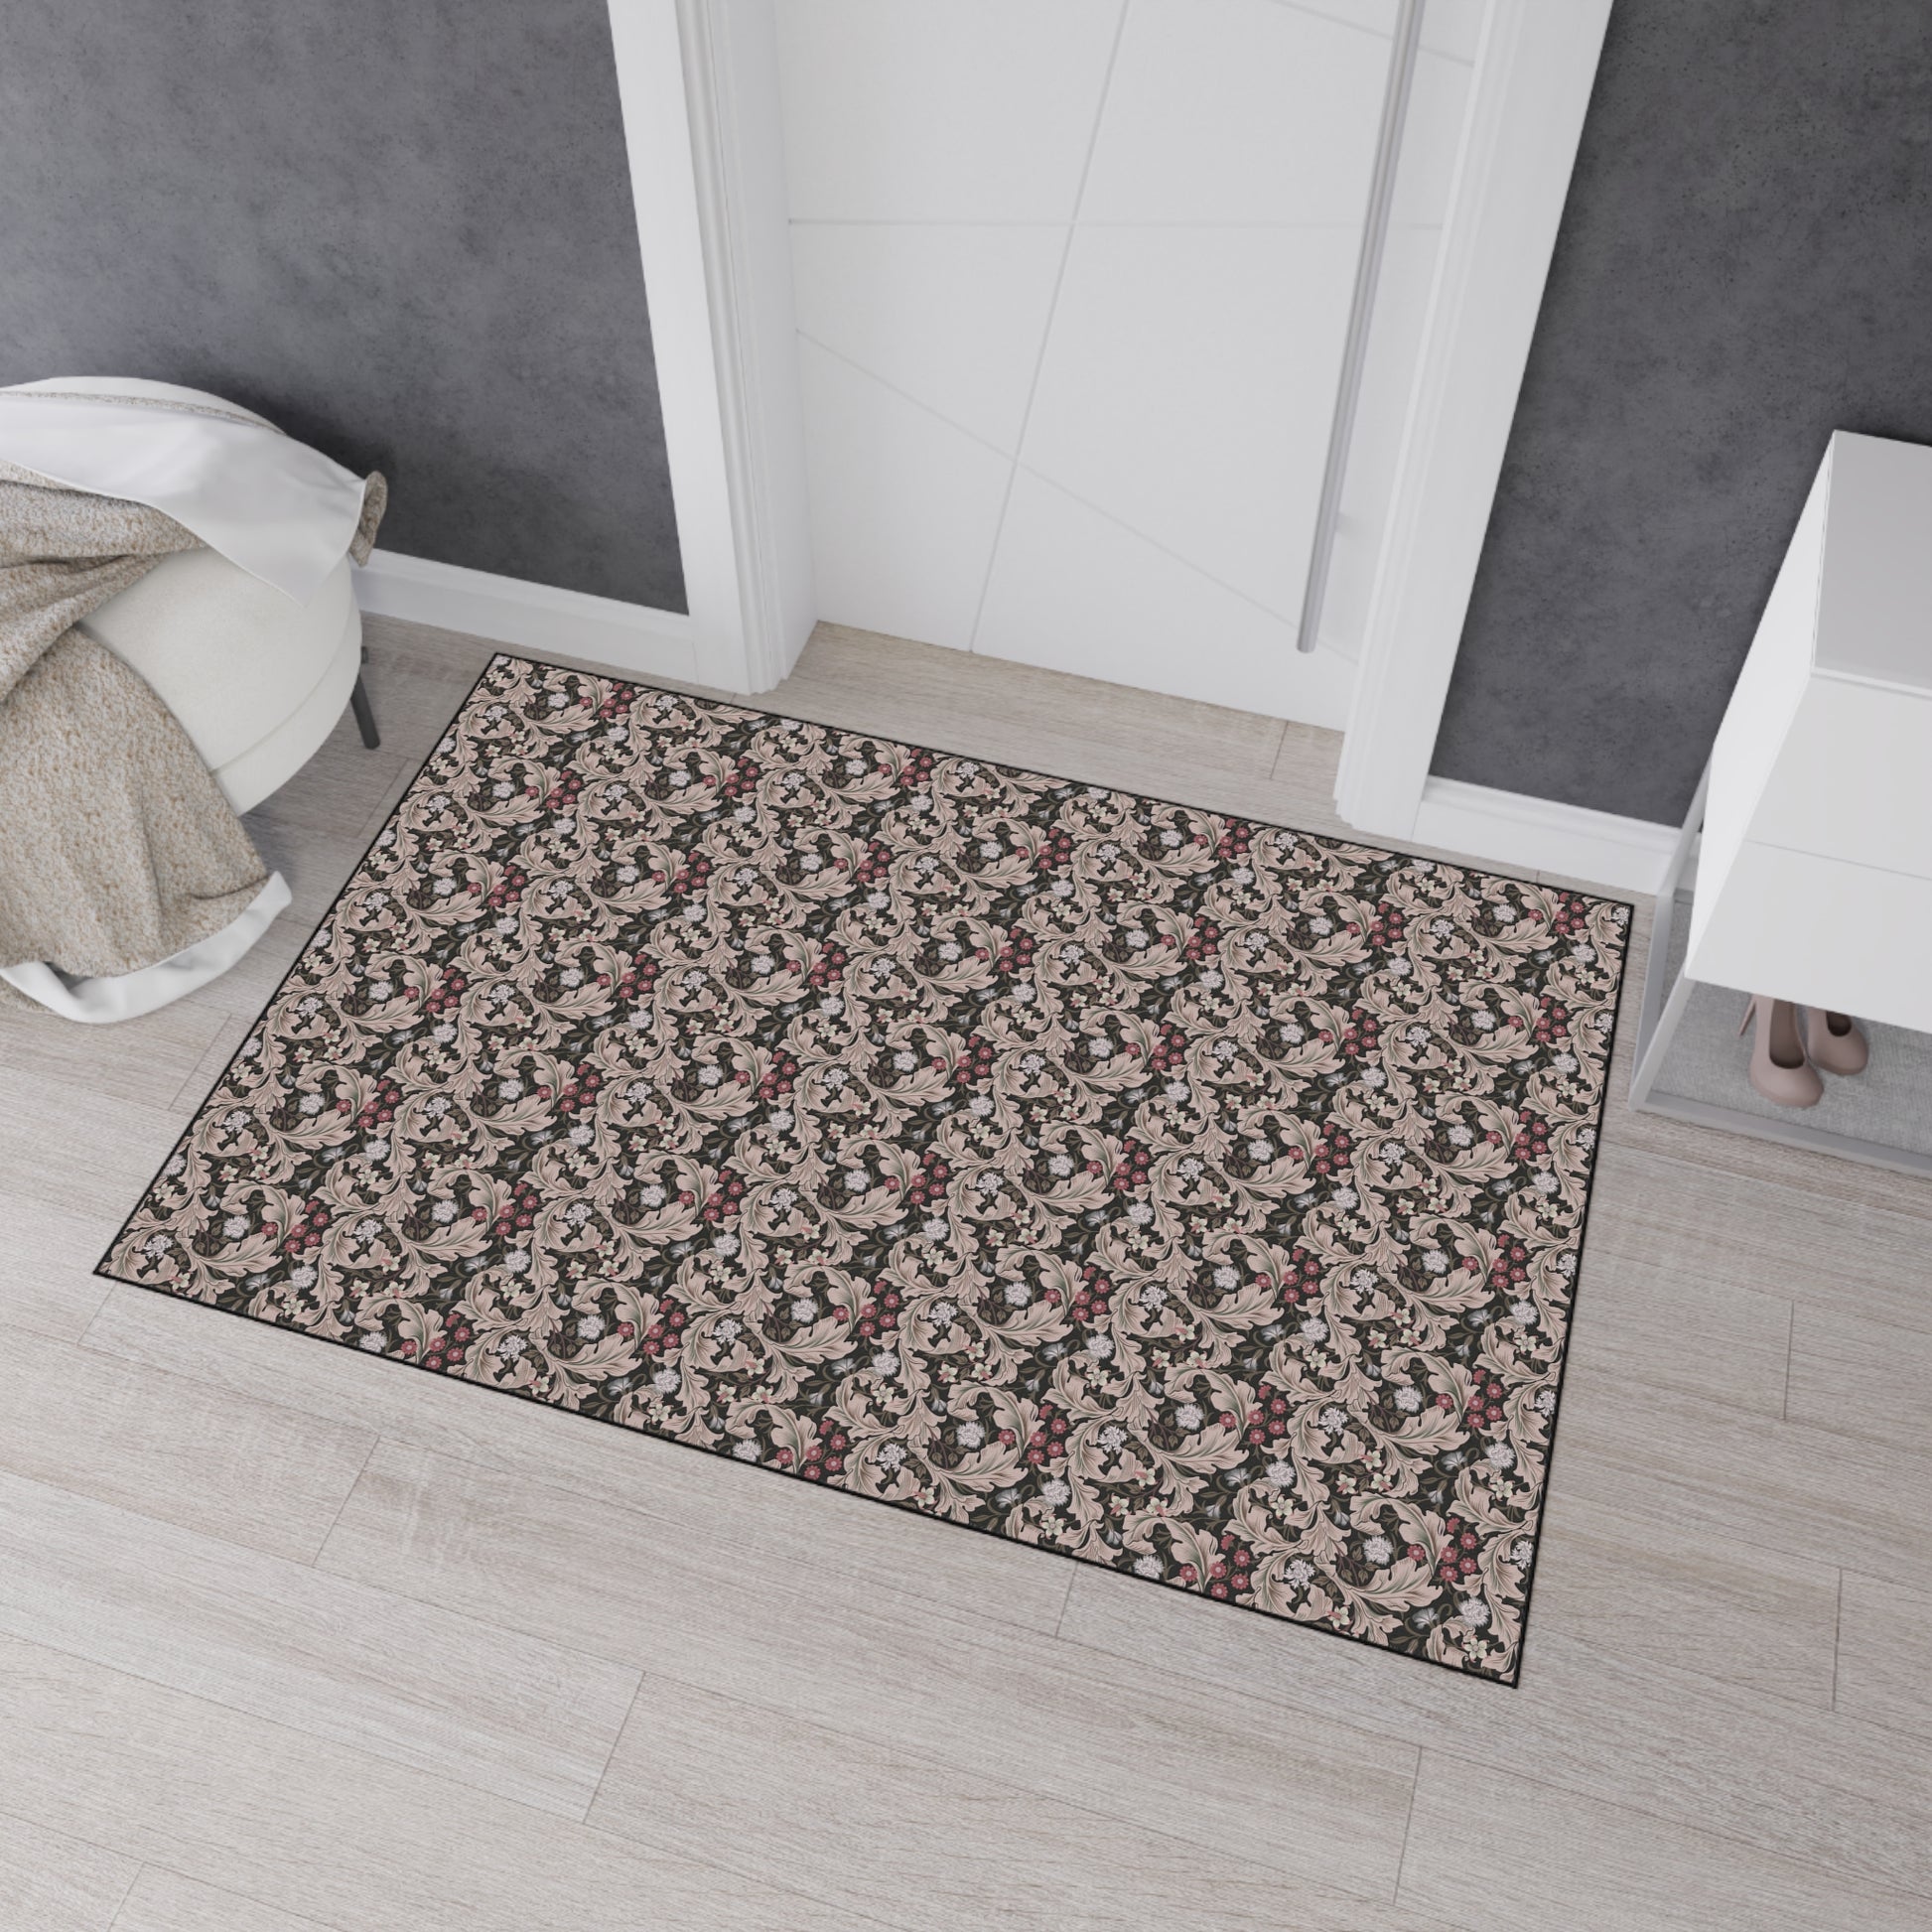 william-morris-co-heavy-duty-floor-mat-leicester-collection-mocha-9